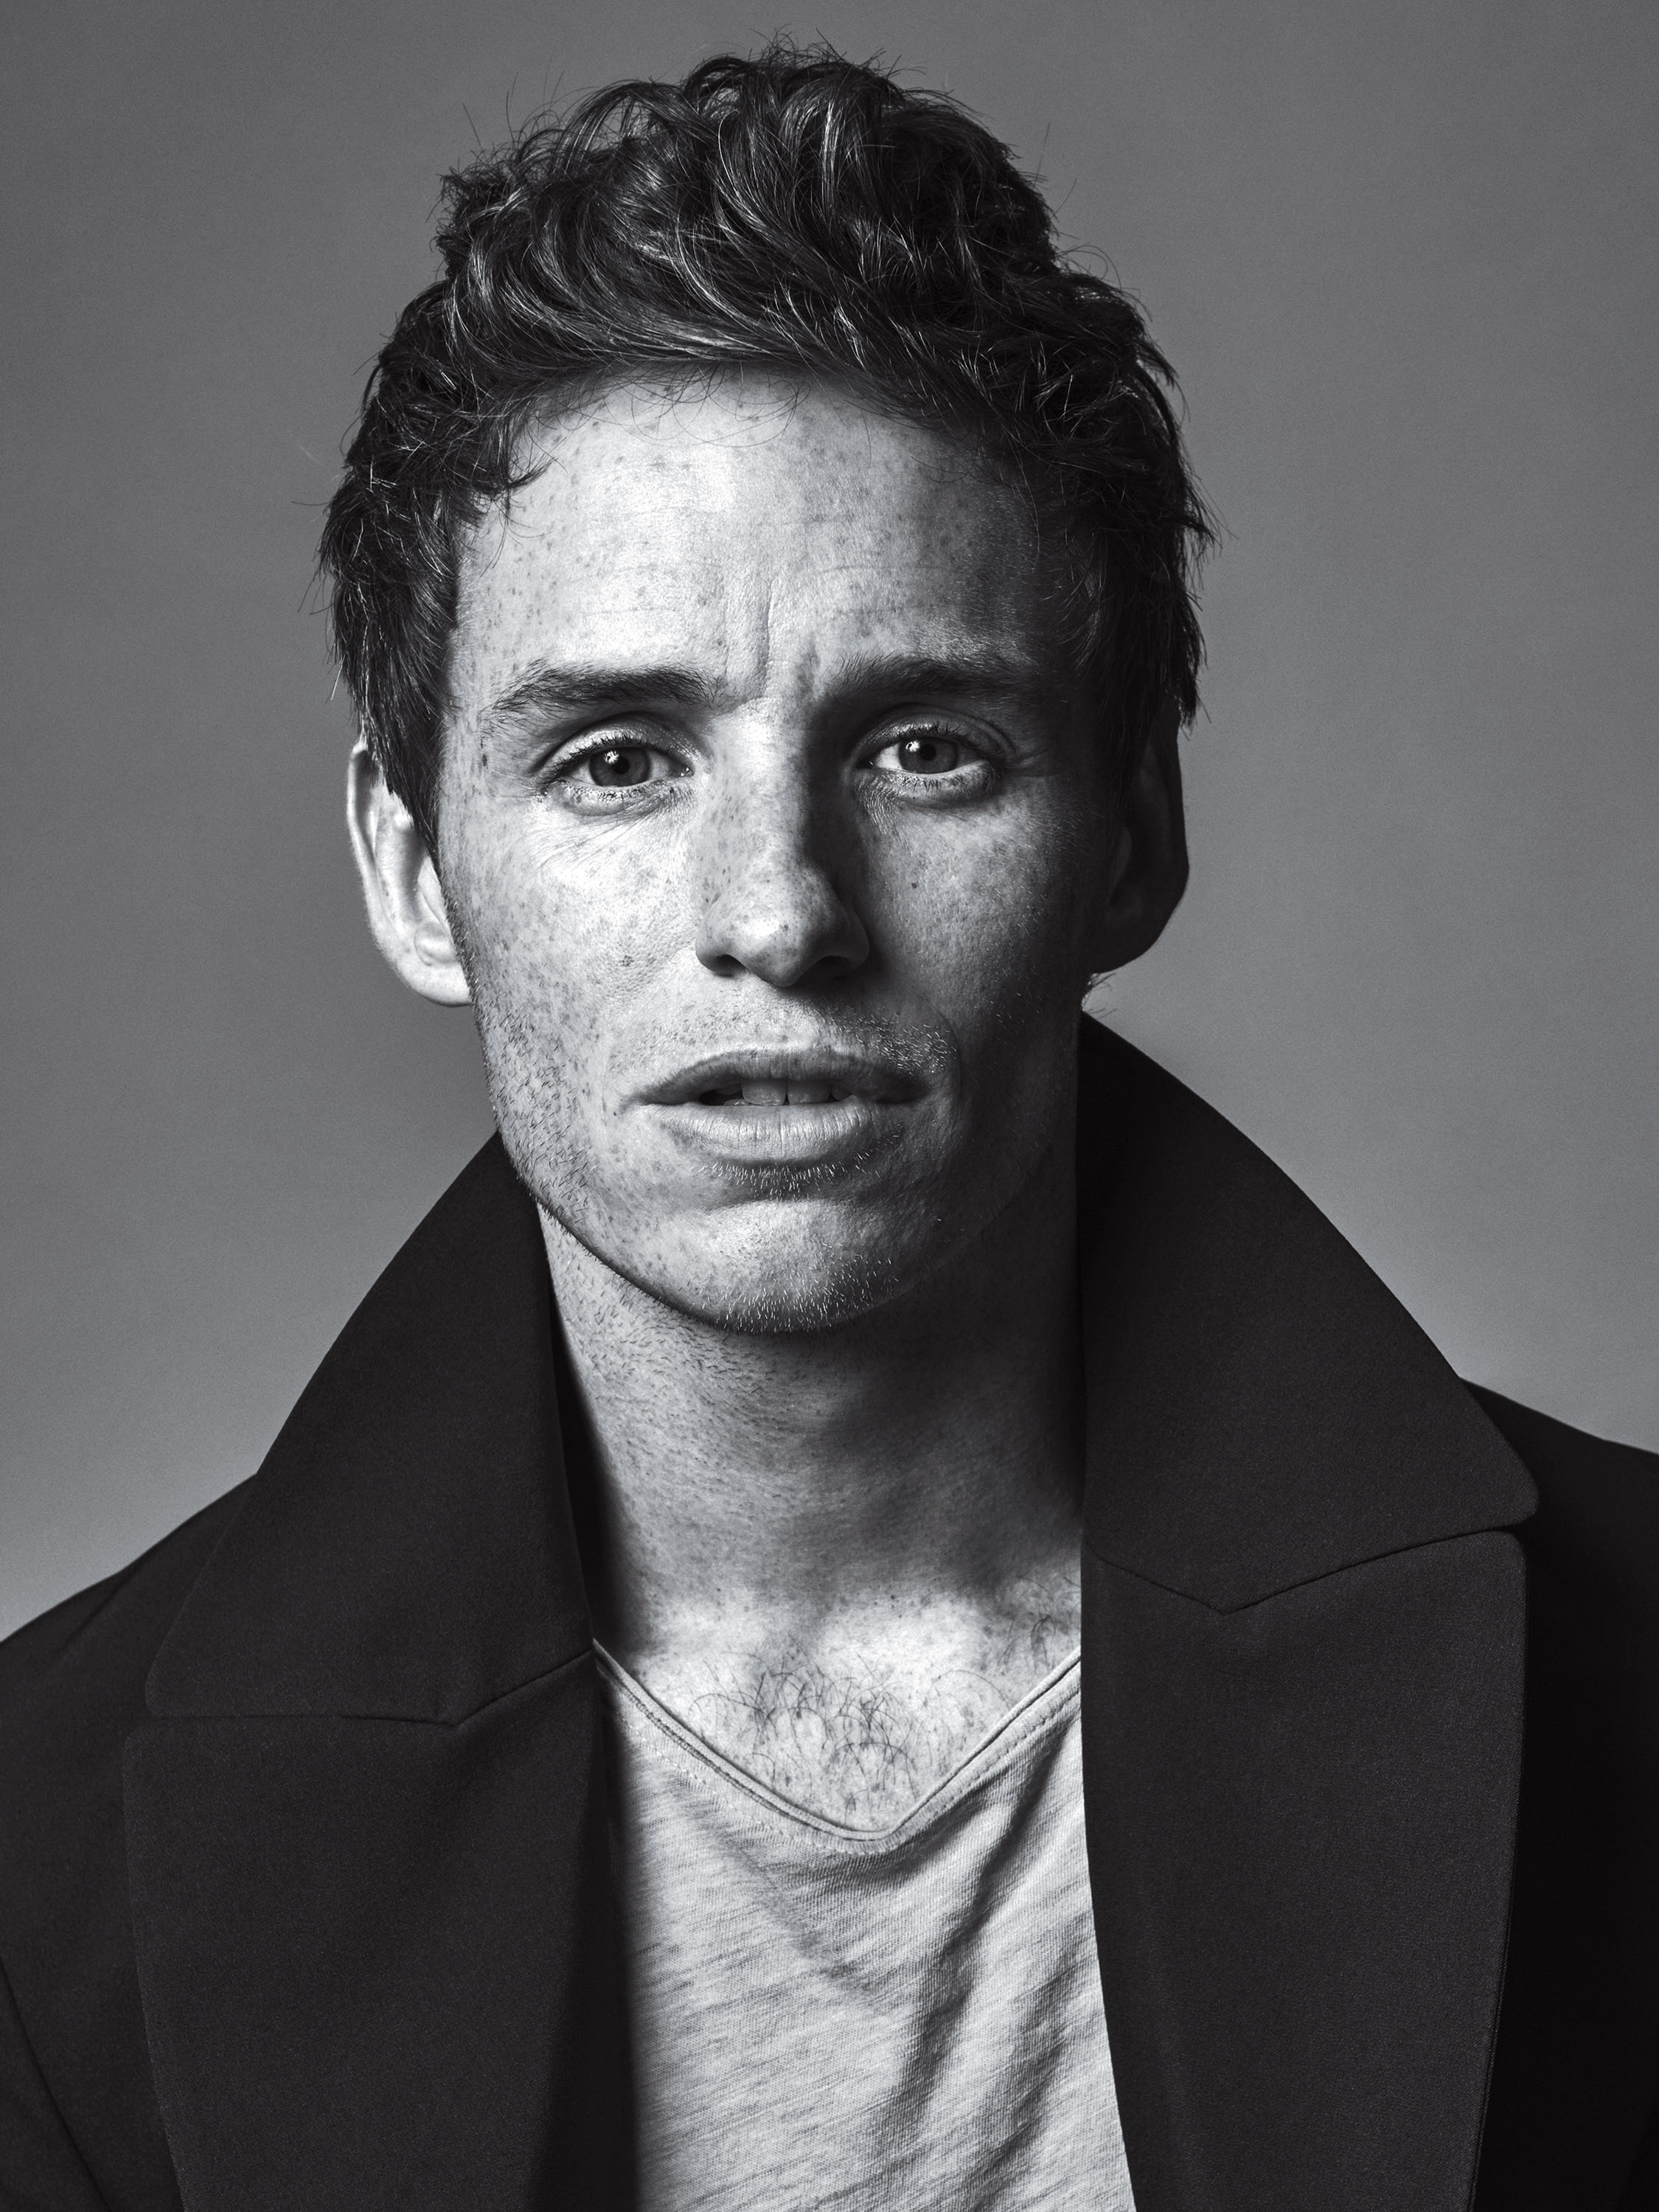 Actor Eddie Redmayne Photographed at the TIME Photo Studio in NYC, October 16, 2014. (Sebastian Kim for TIME)